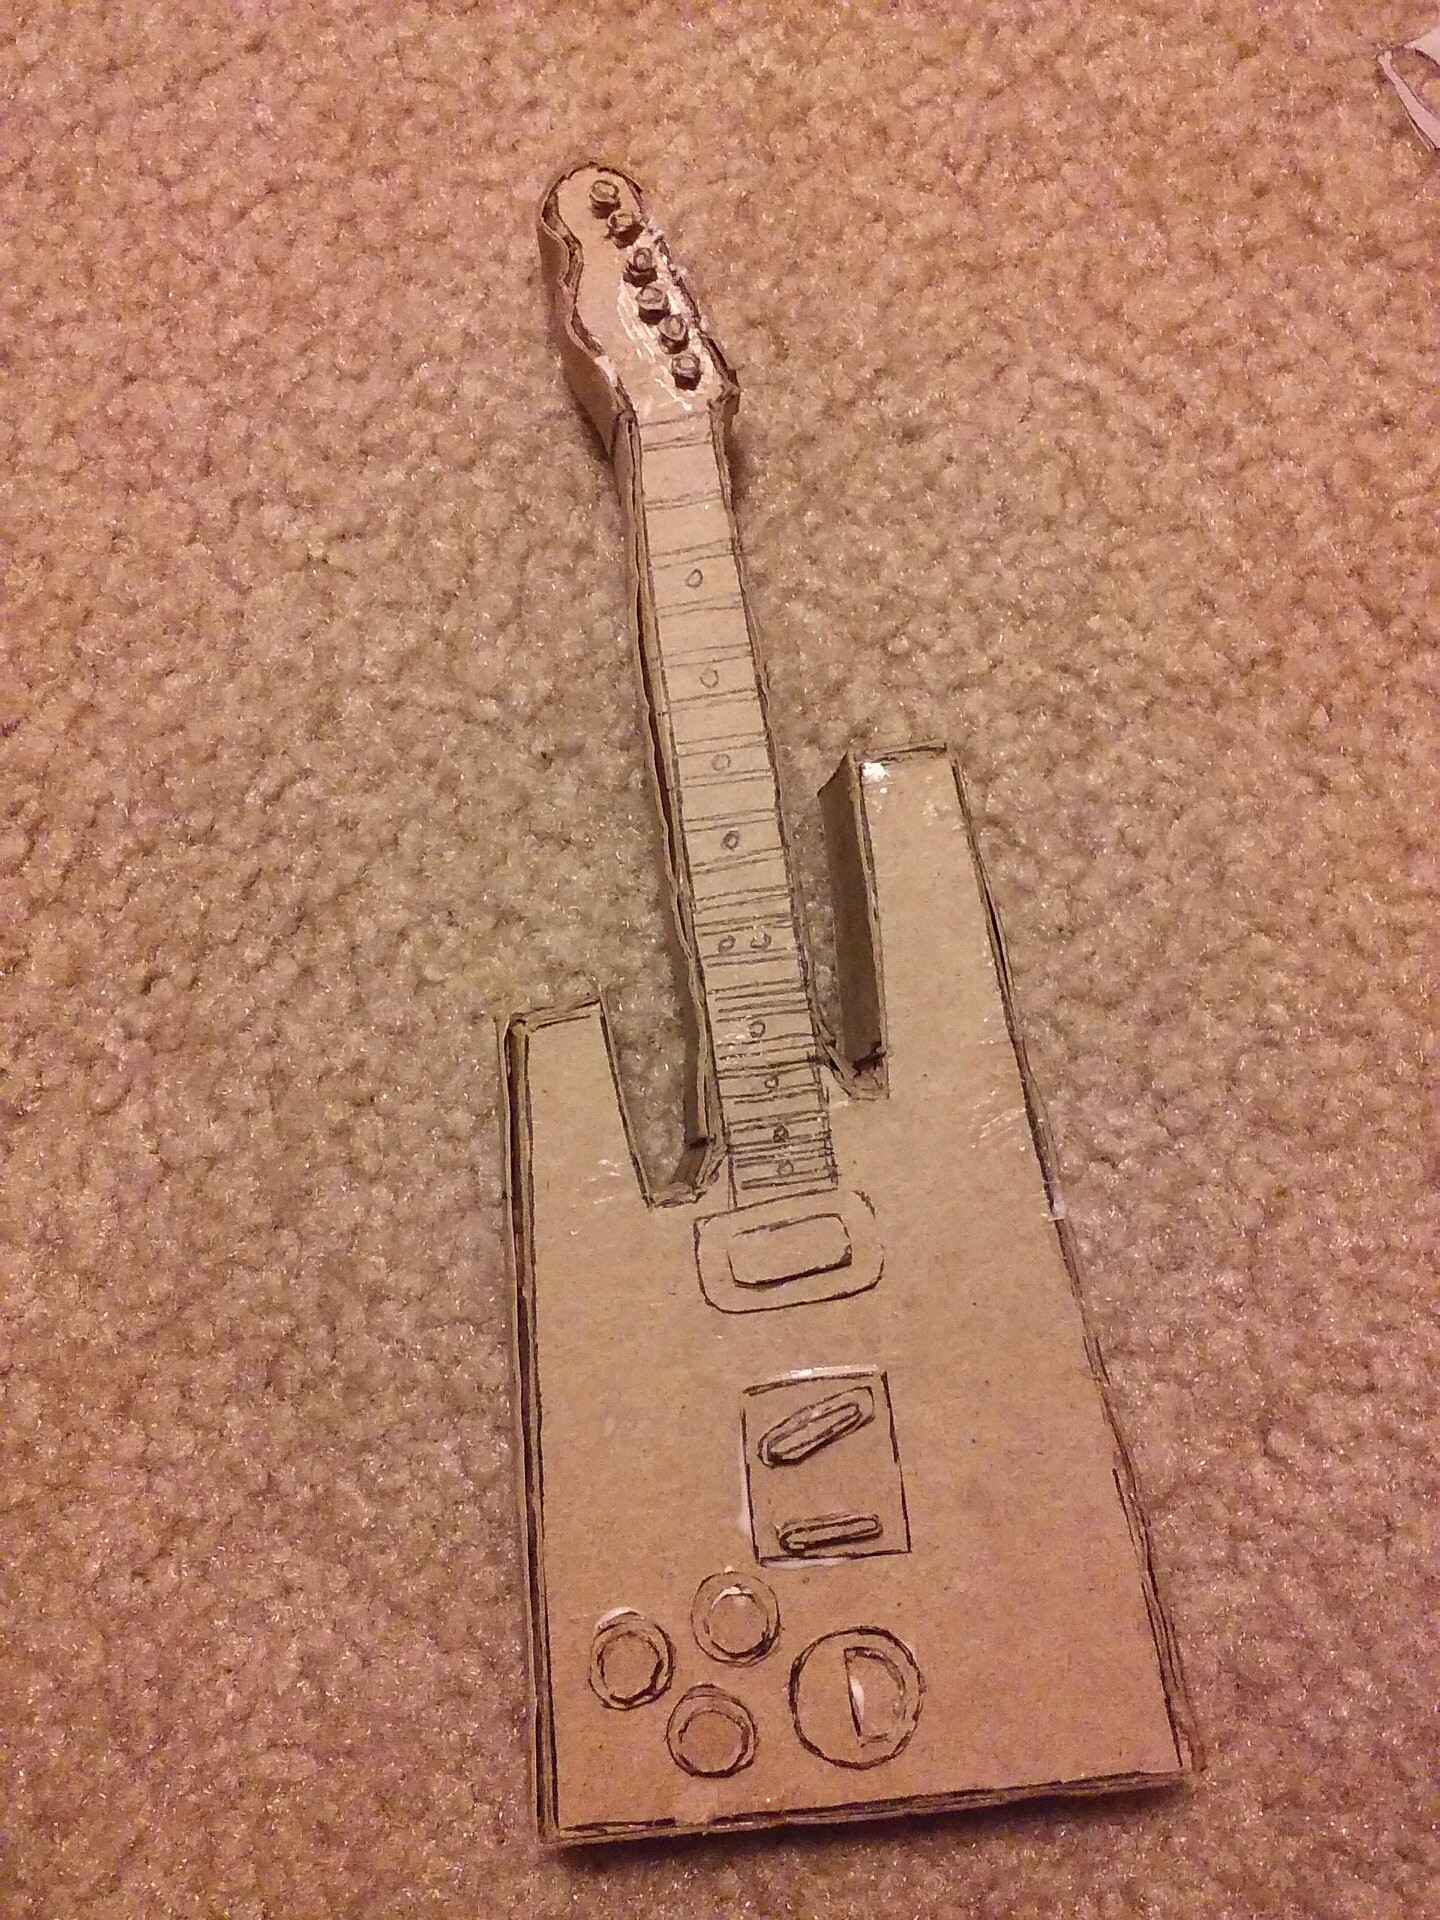 The guitar in progress again. It now has all of the little details on it, but has not been painted yet.